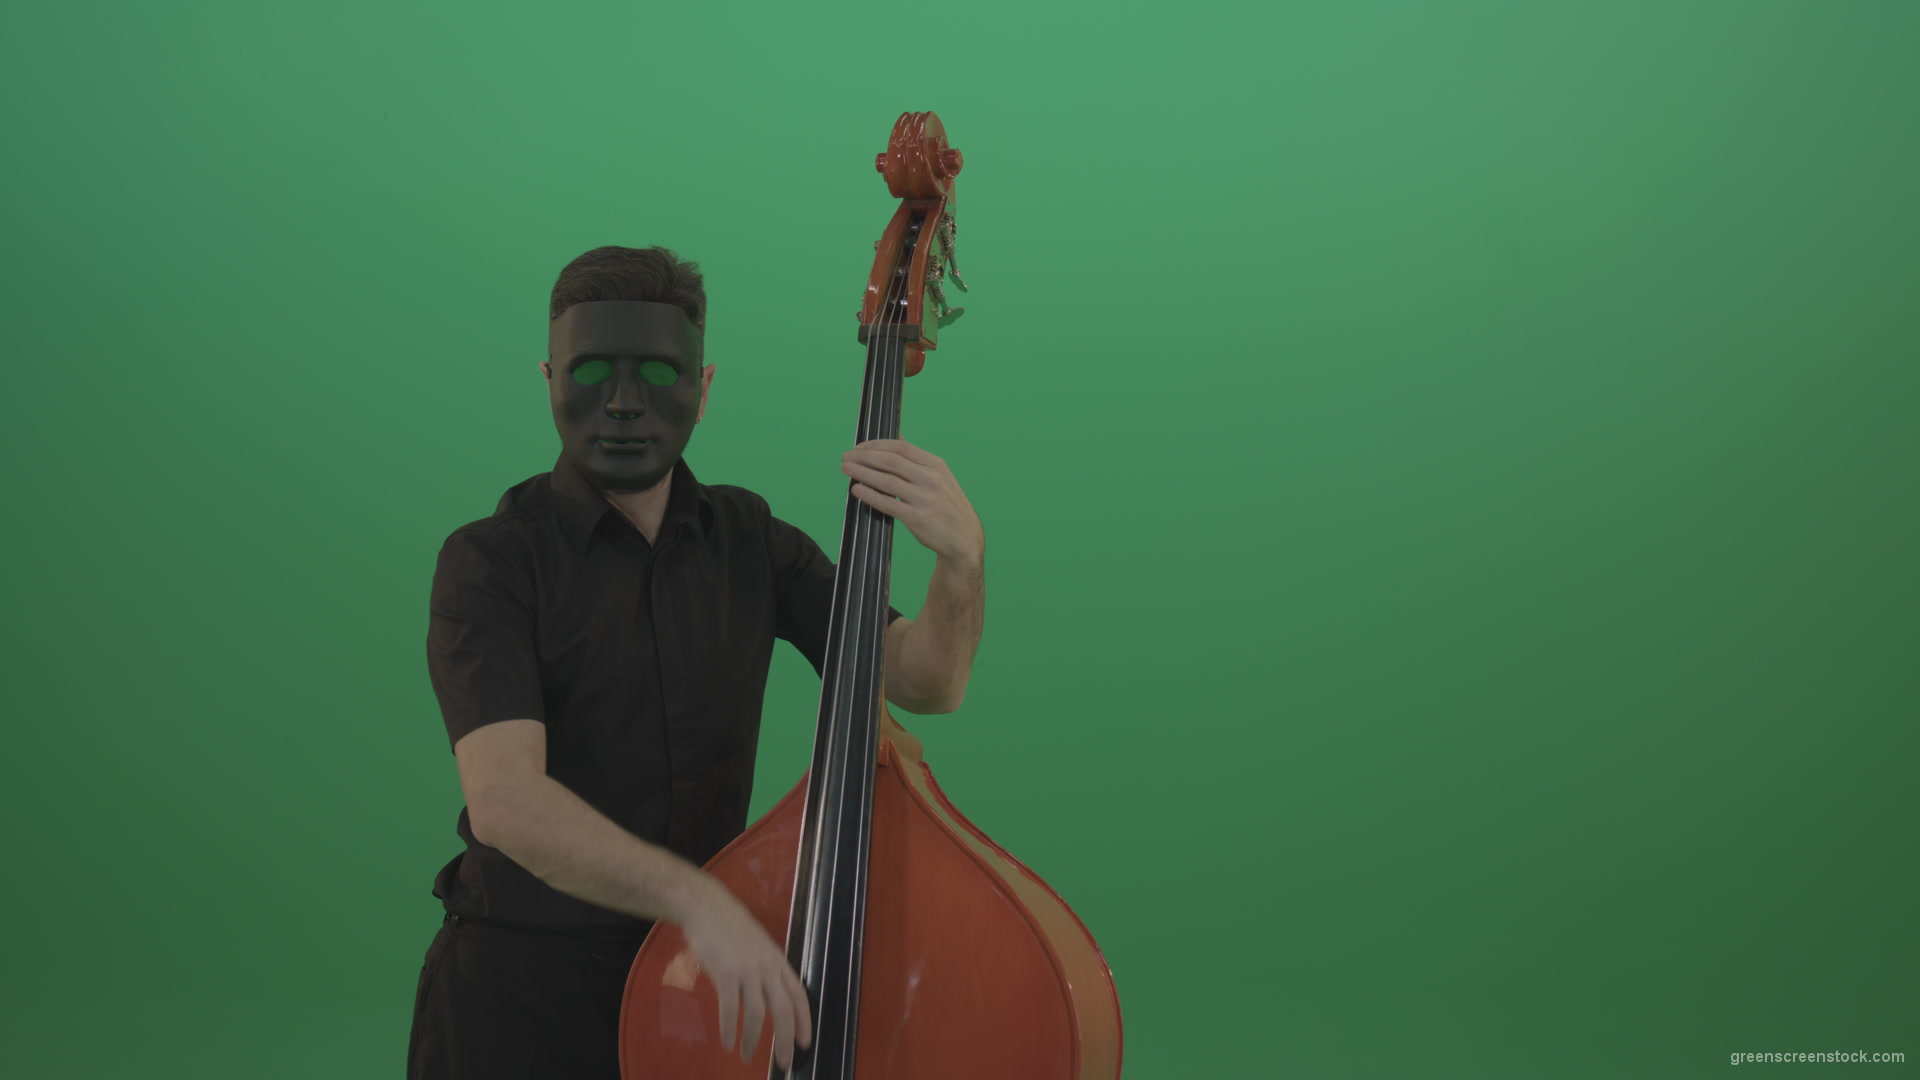 Man-in-black-mask-with-green-eyes-play-music-on-double-bass-instrument-isolated-on-green-screen_002 Green Screen Stock